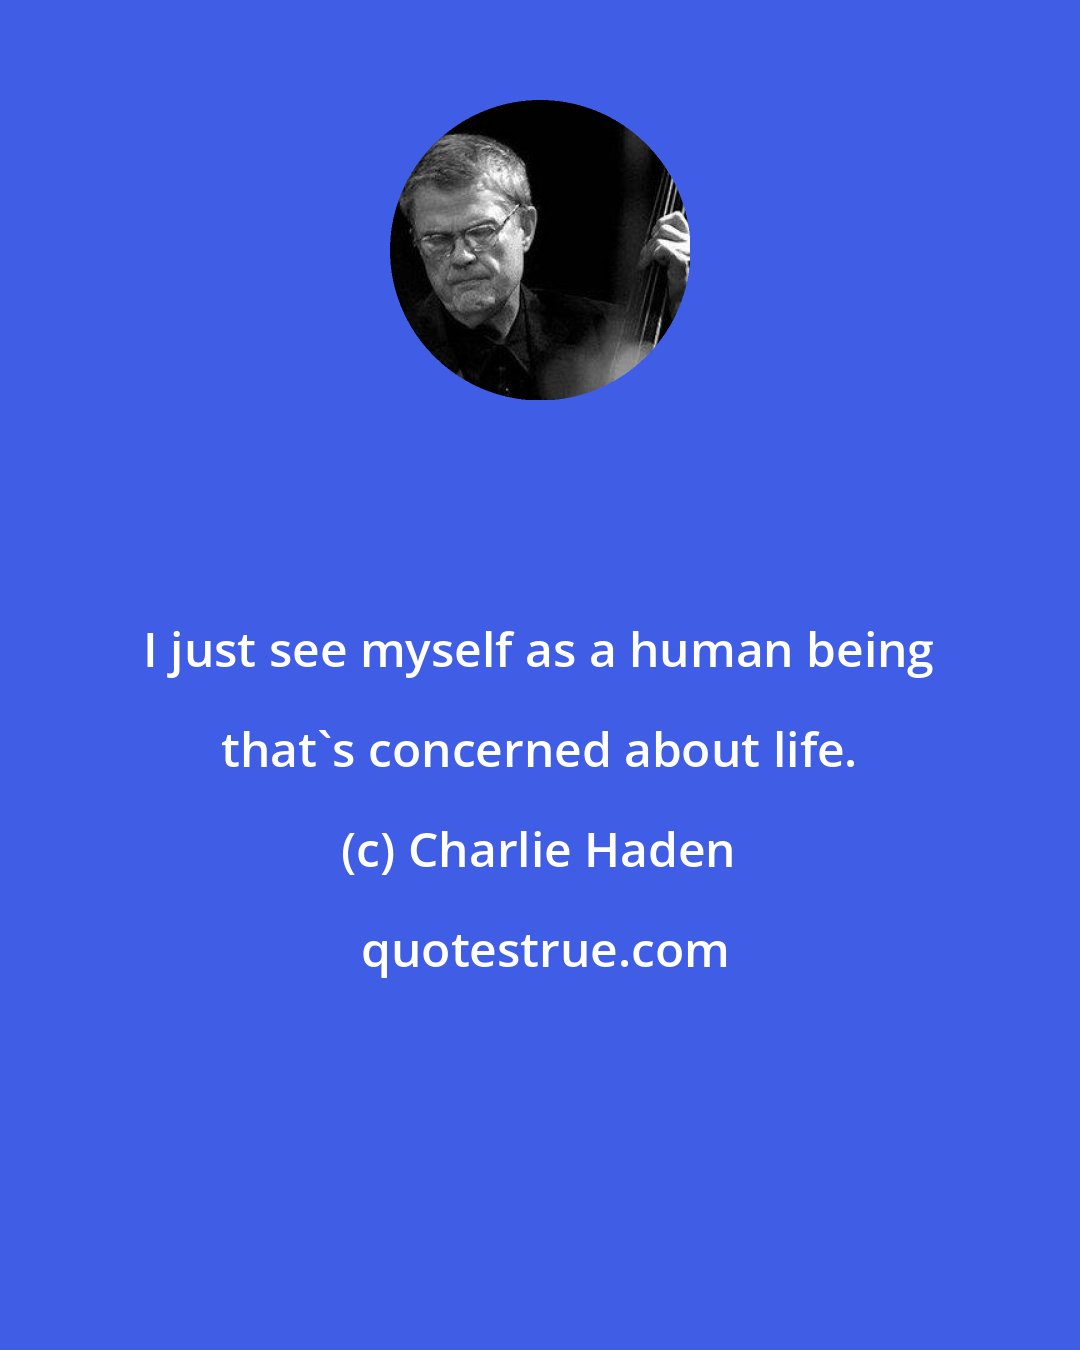 Charlie Haden: I just see myself as a human being that's concerned about life.